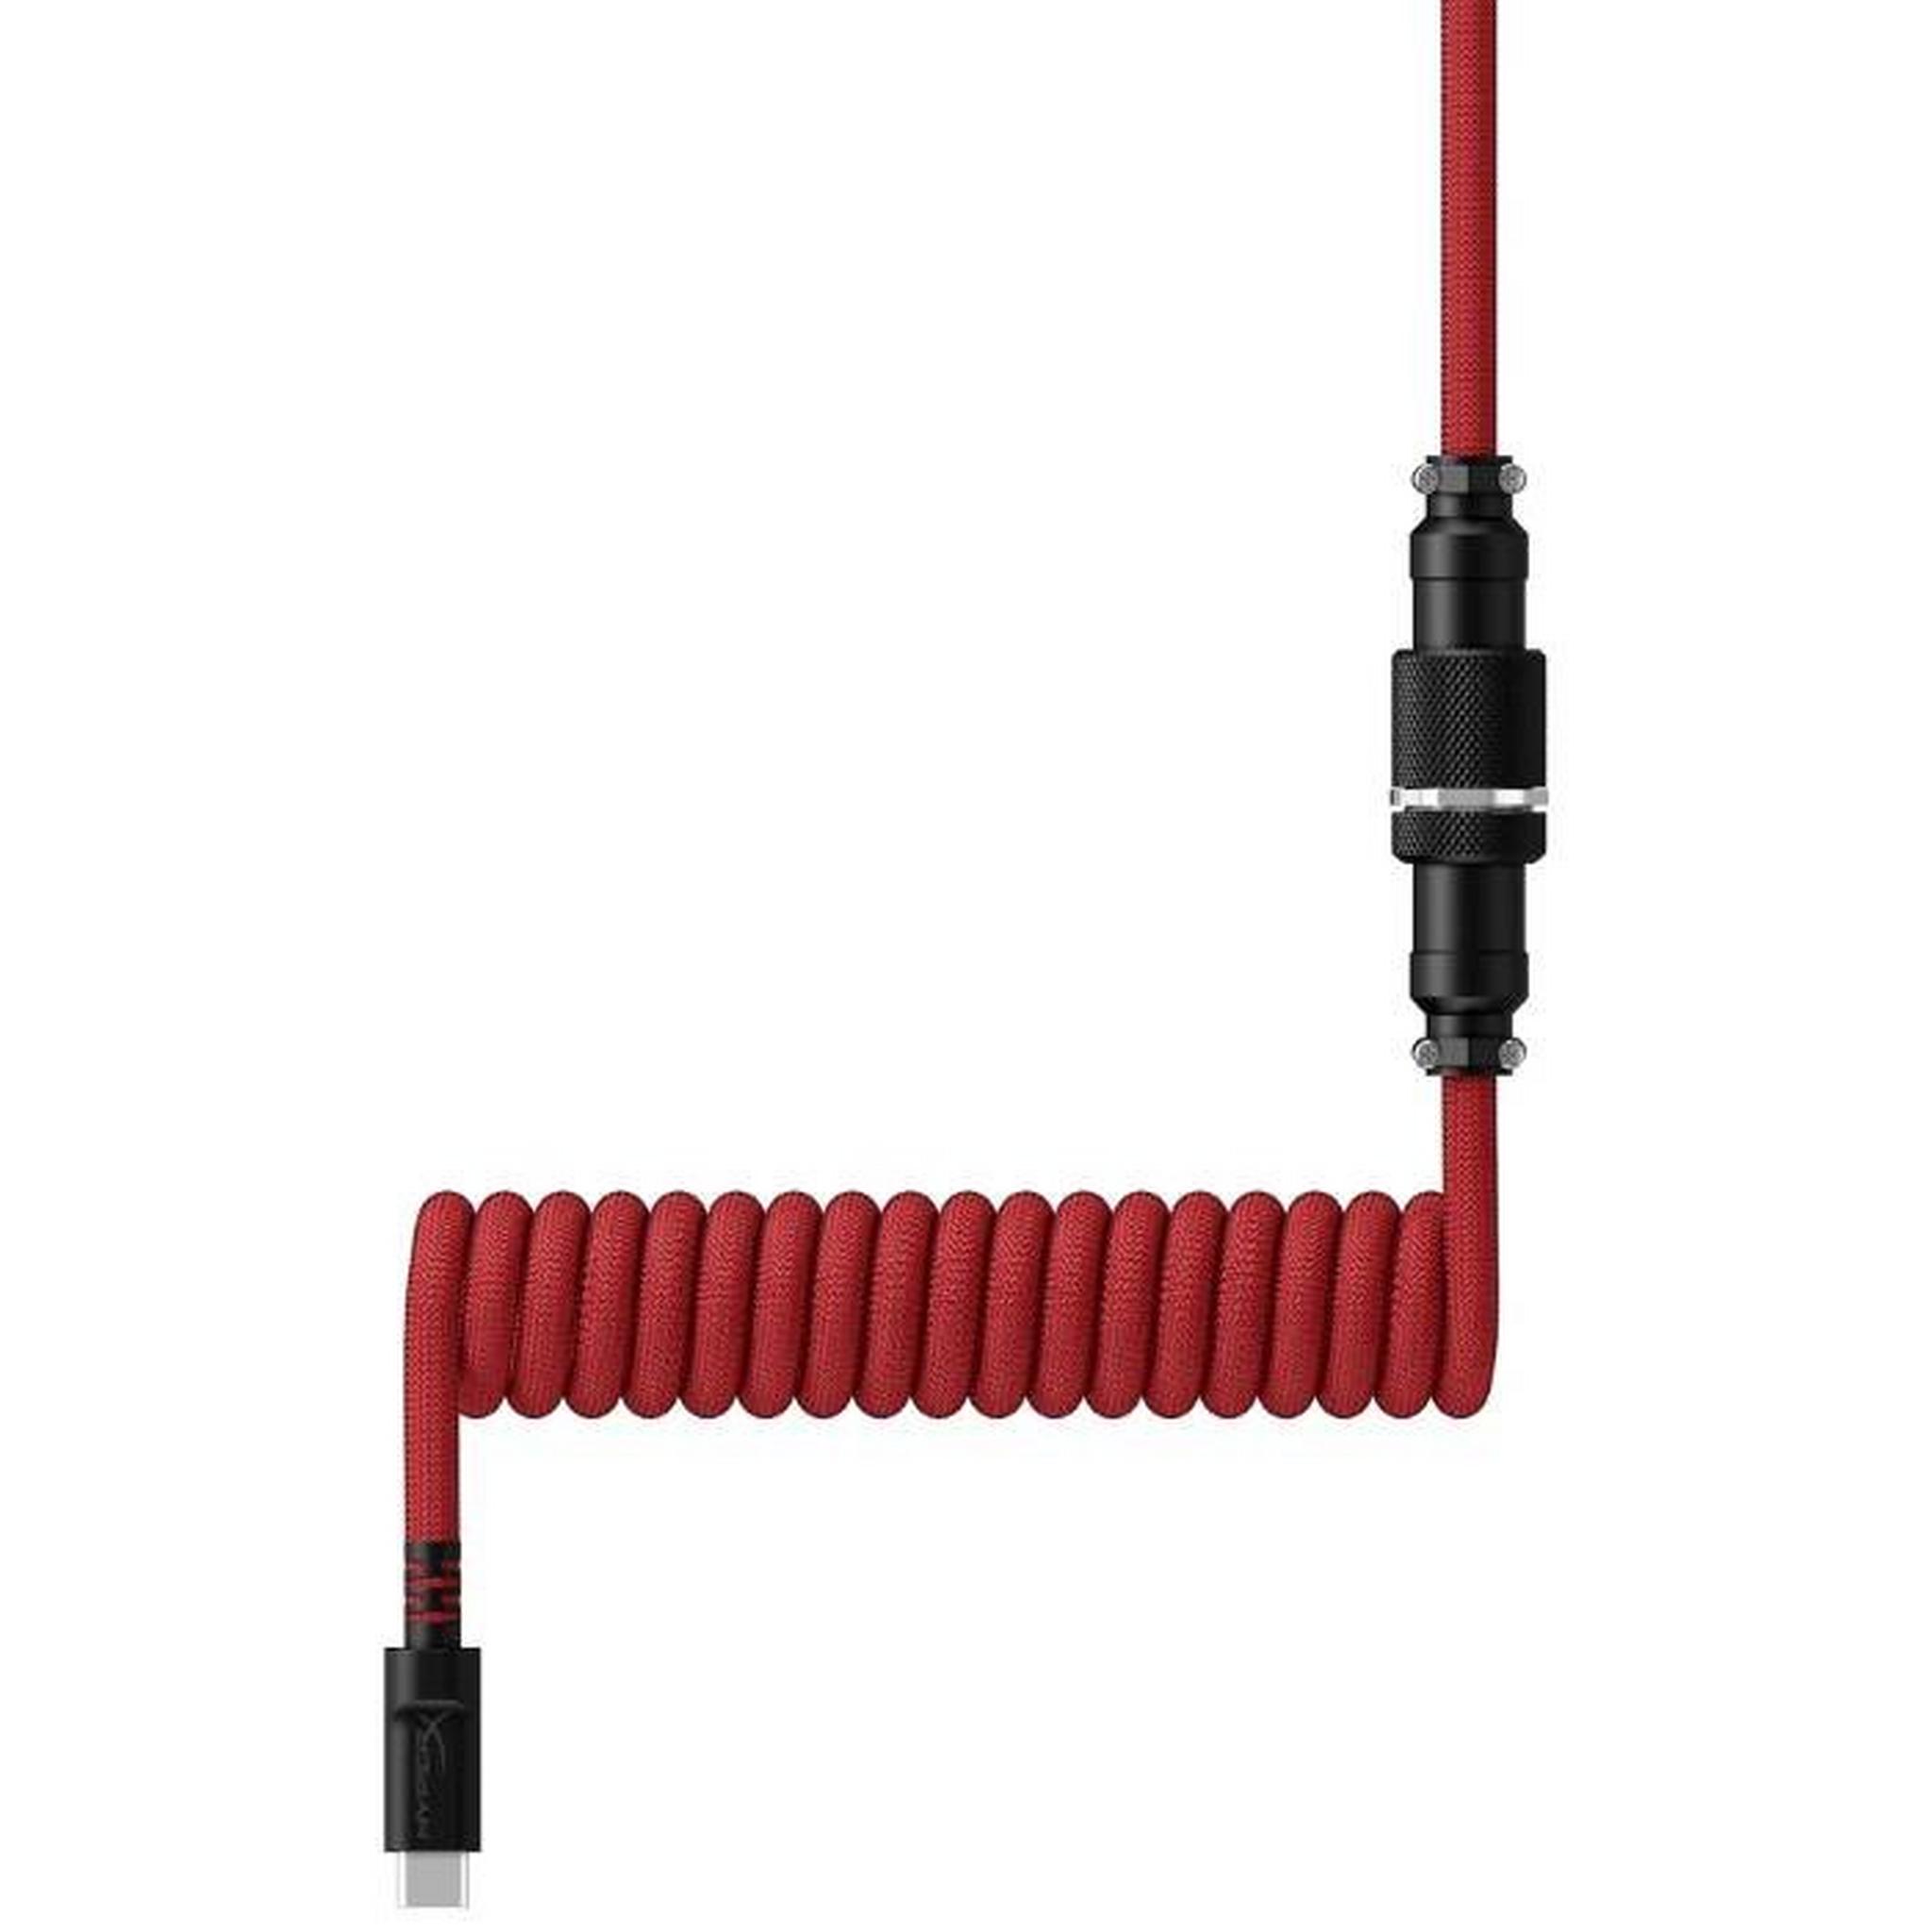 HyperX USB-C Coiled 1.37m Cable – Red/Black